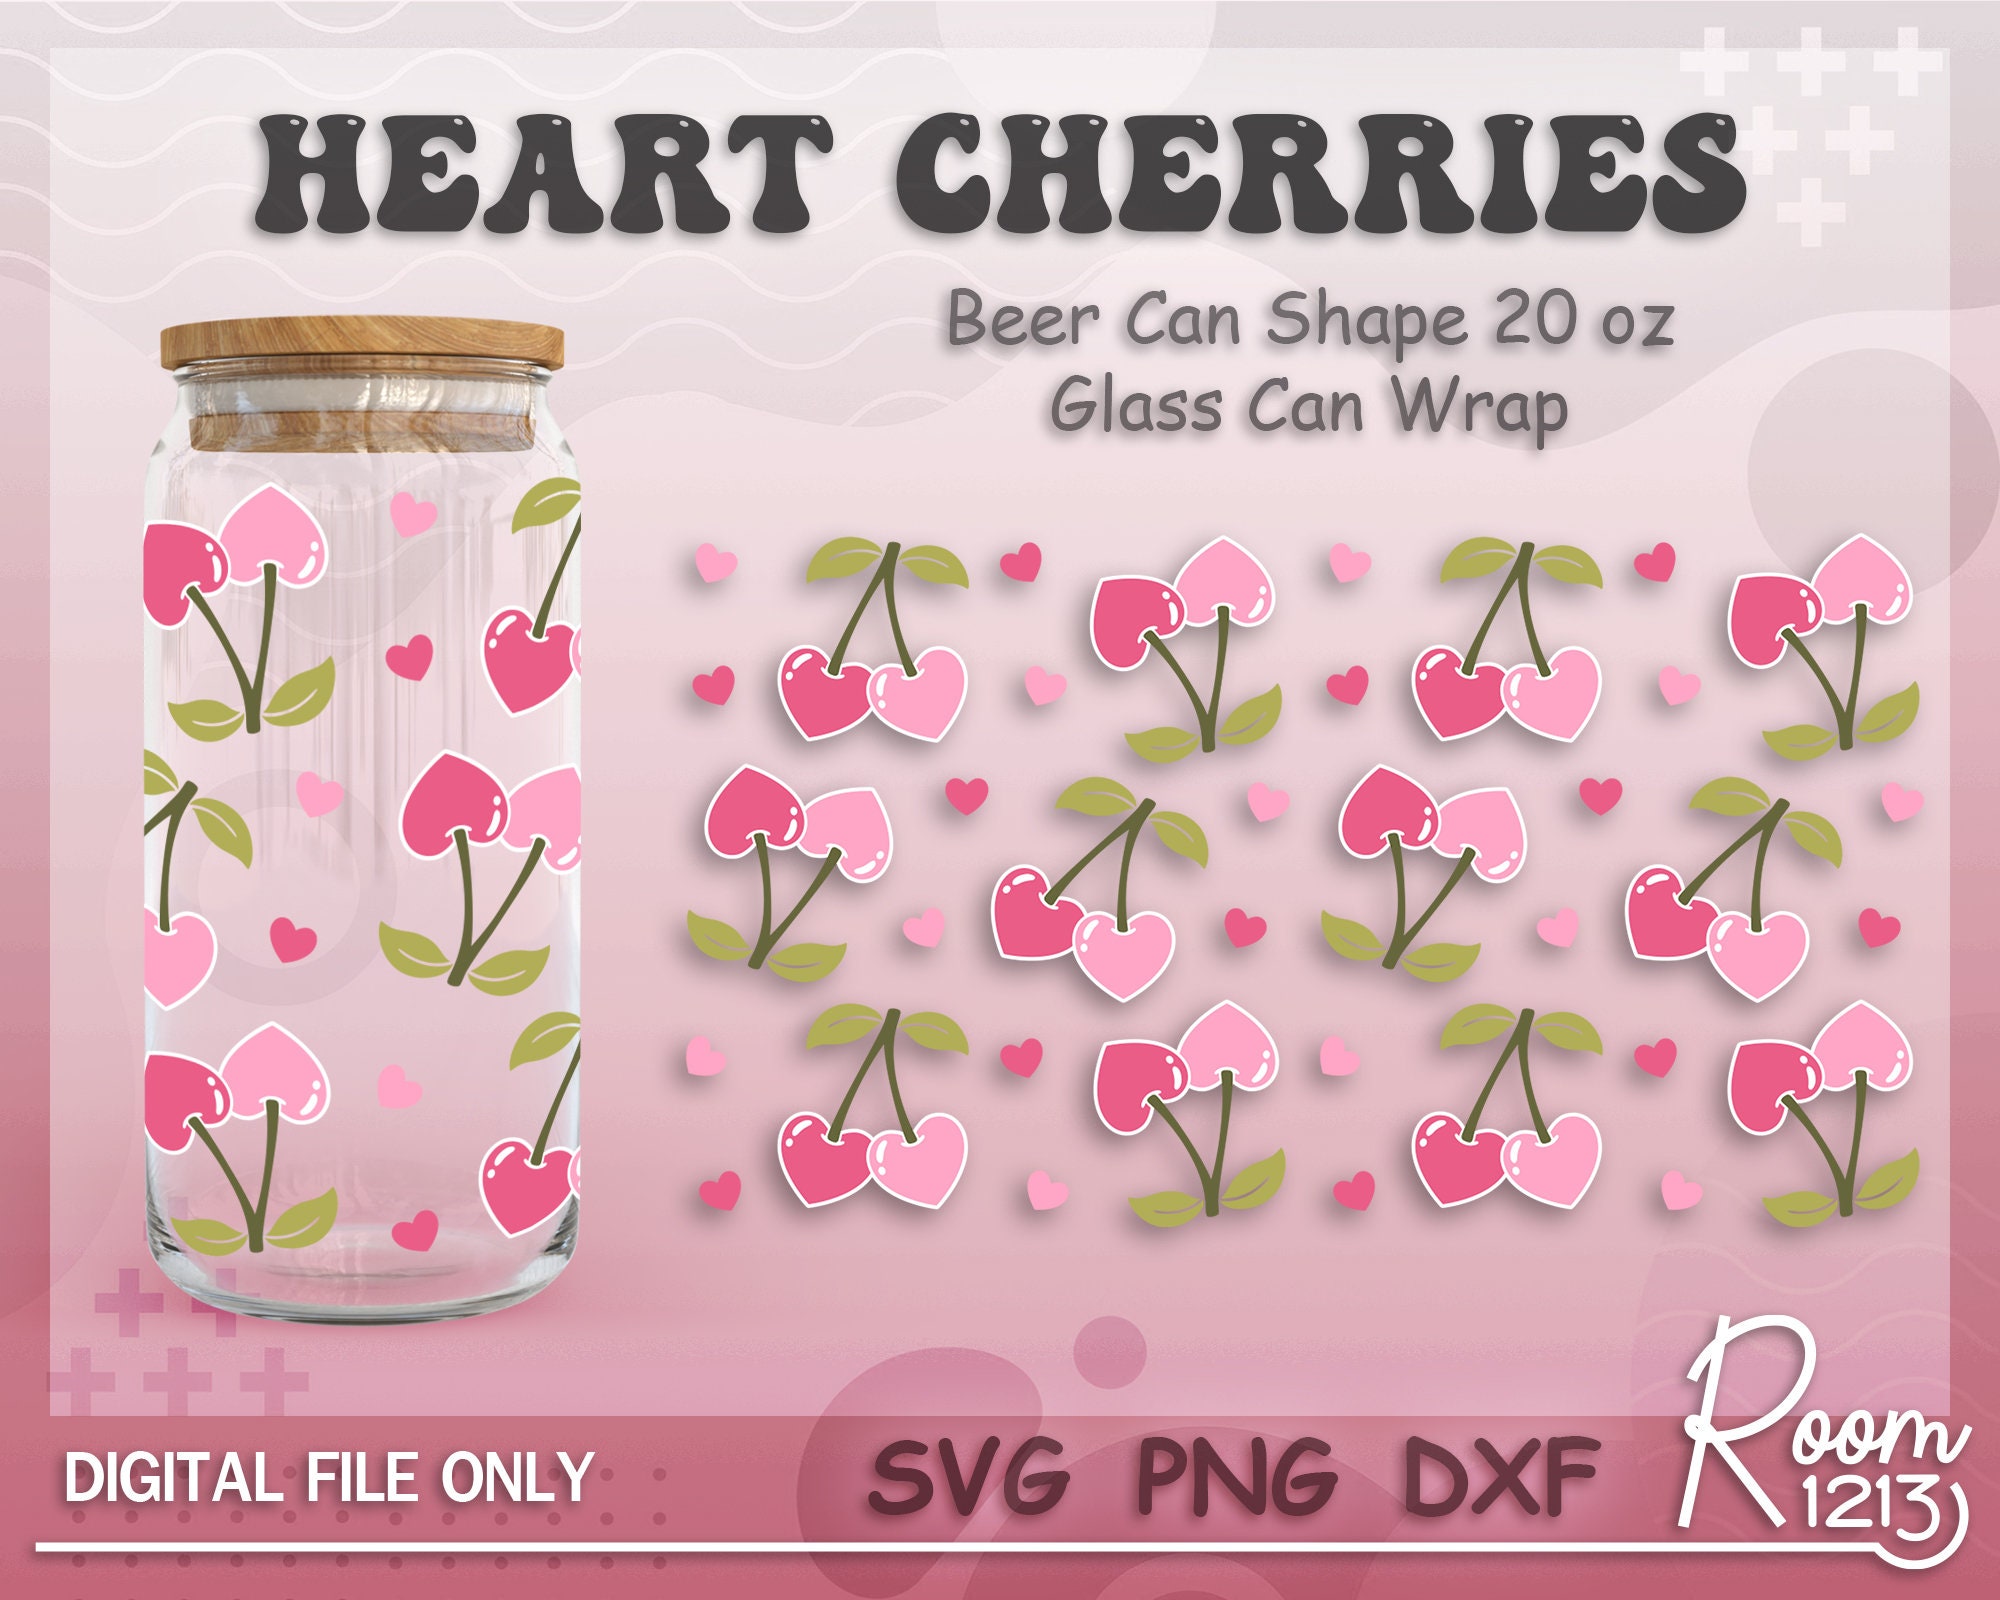 Cherry Hearts 5 Inch Finished Cherry Hearts for Decor Wood Hearts